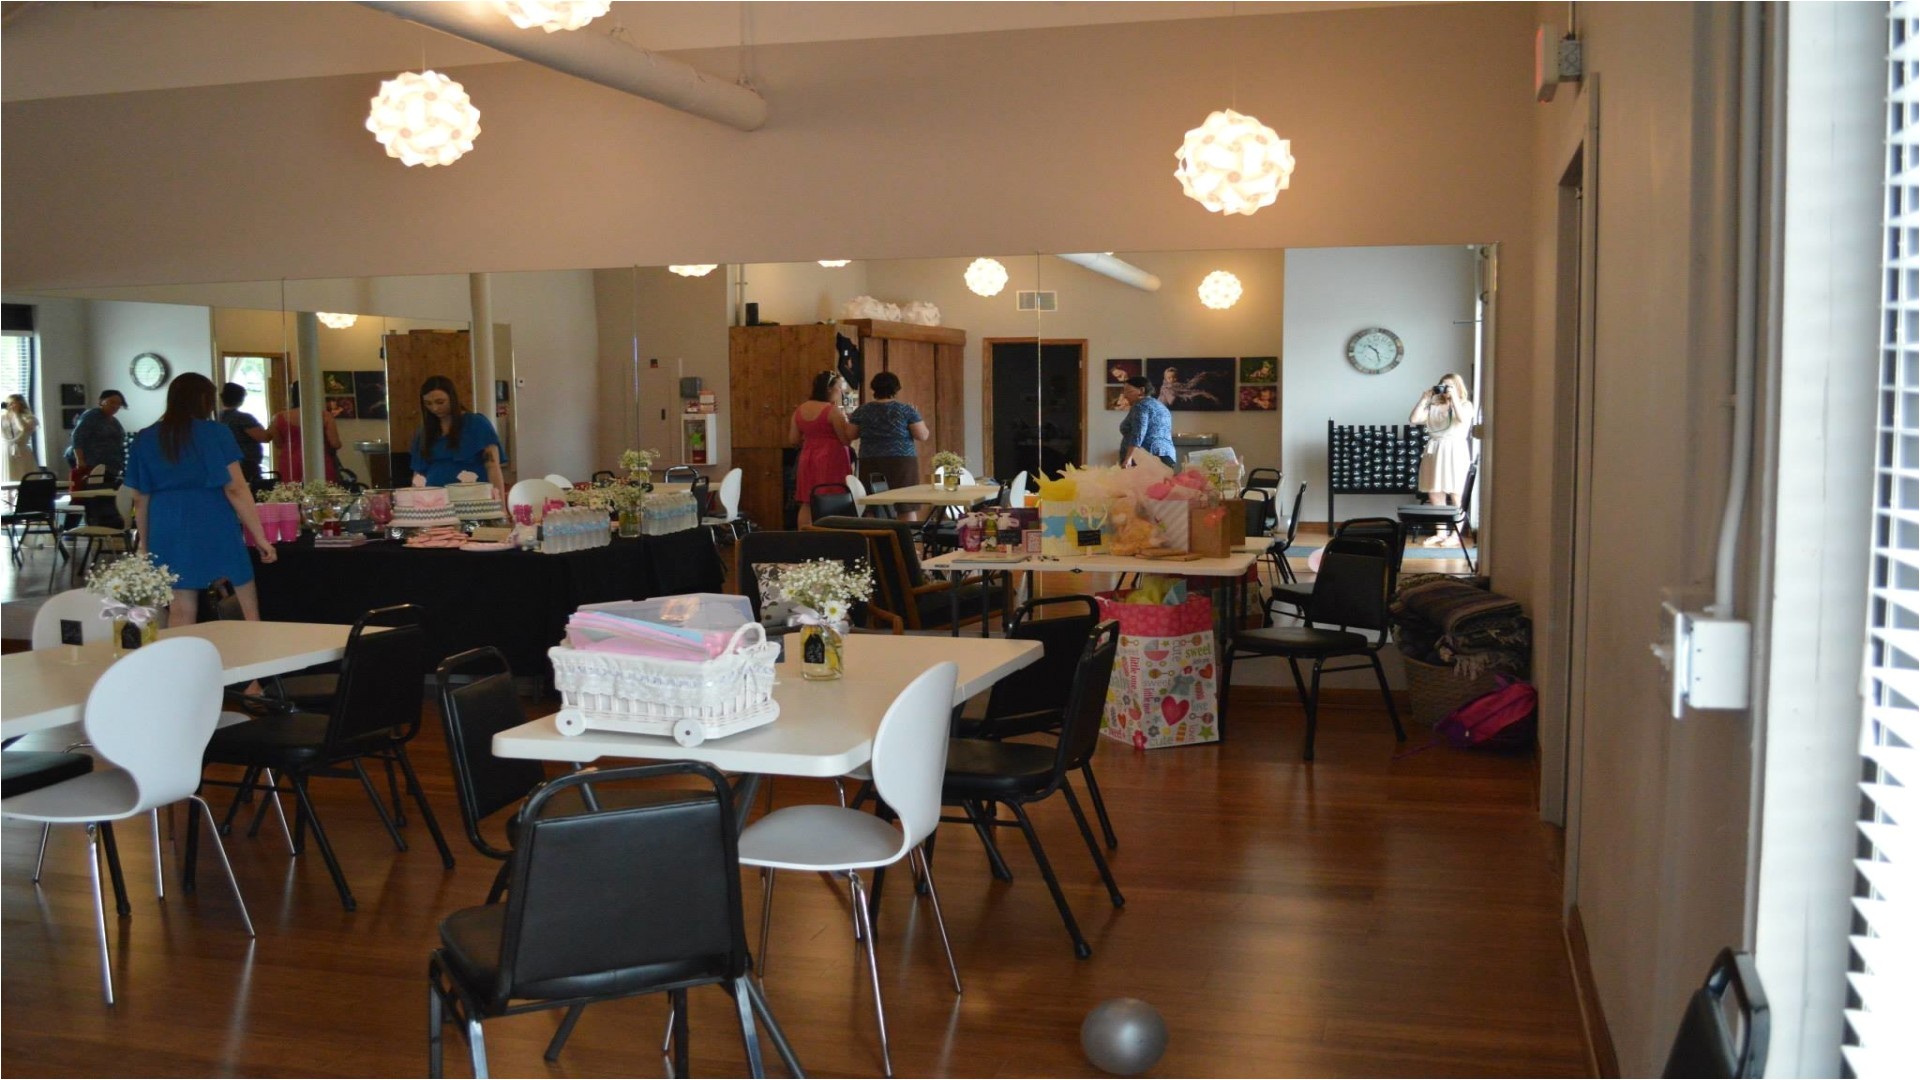 Baby Shower Venues Charlotte Nc Luxury Baby Shower Venues atlanta Baby Shower Ideas